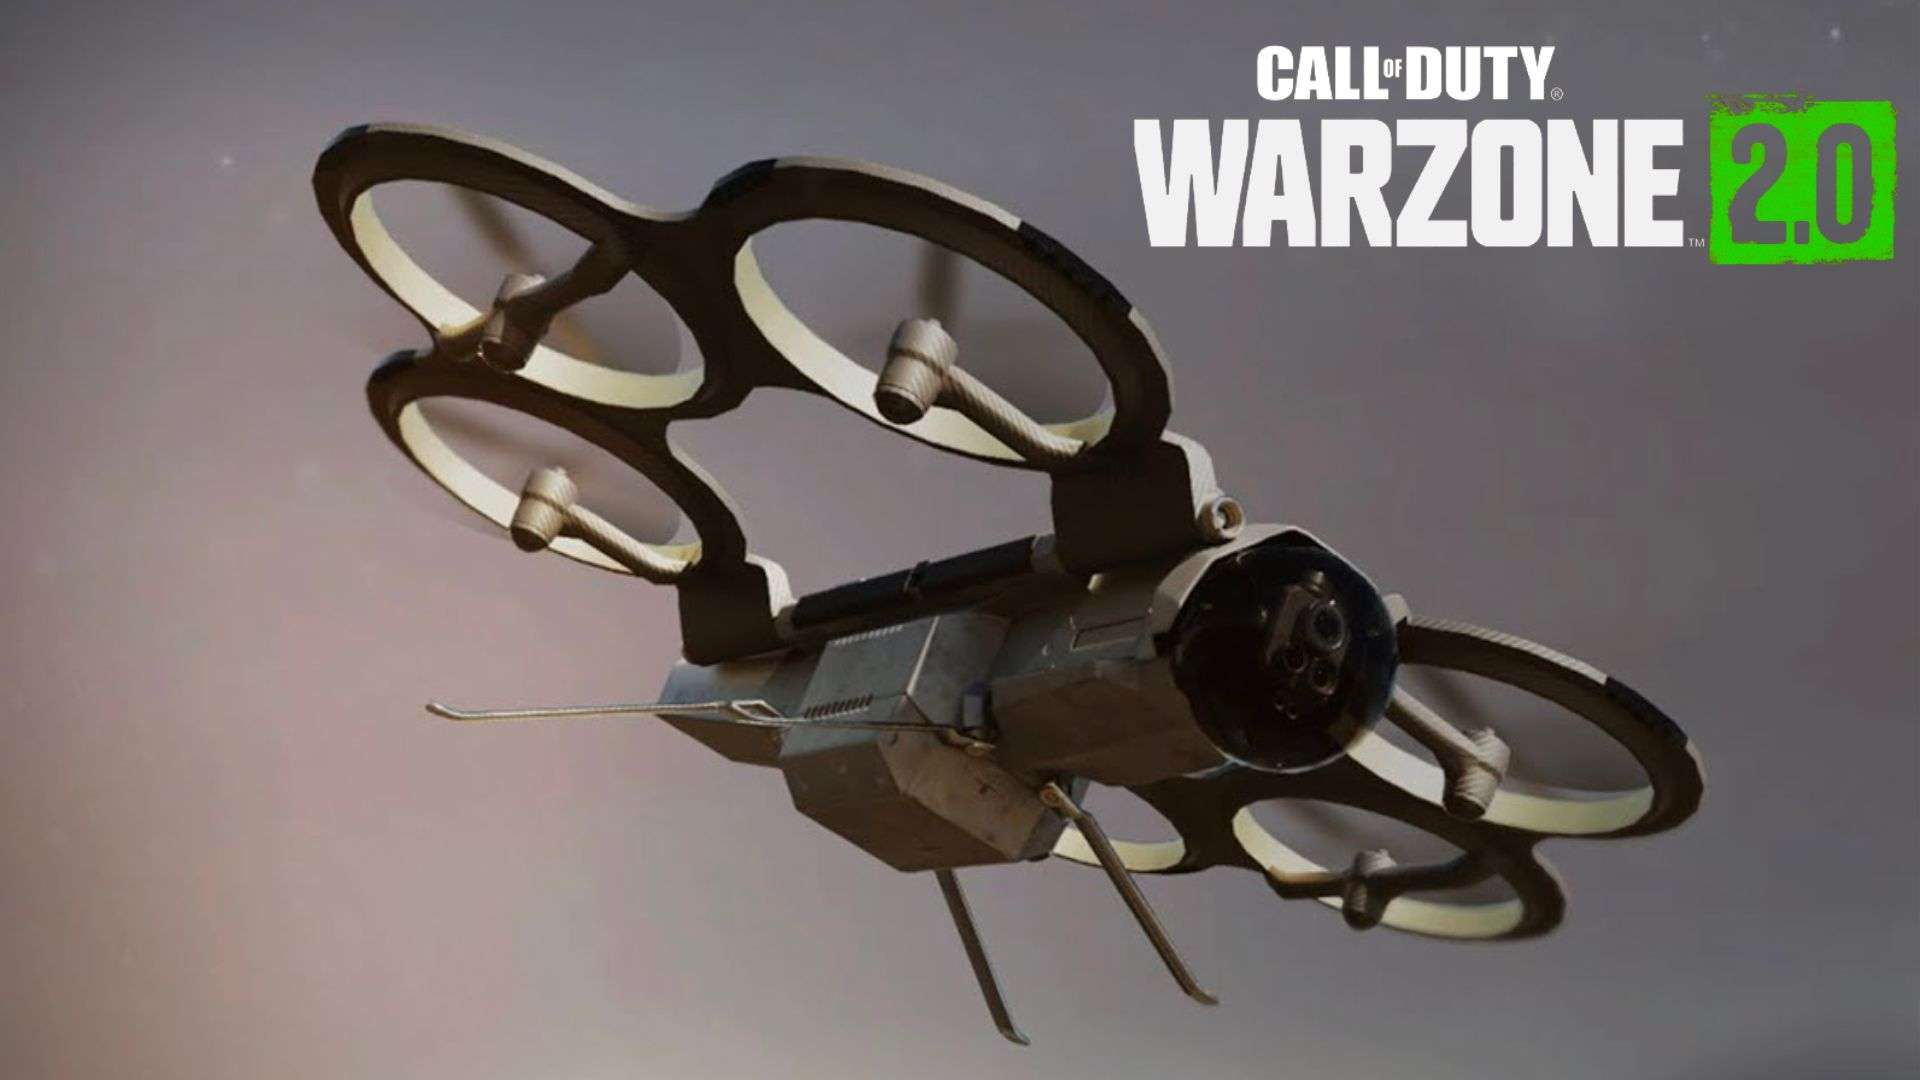 Drone in sky with Warzone 2 logo